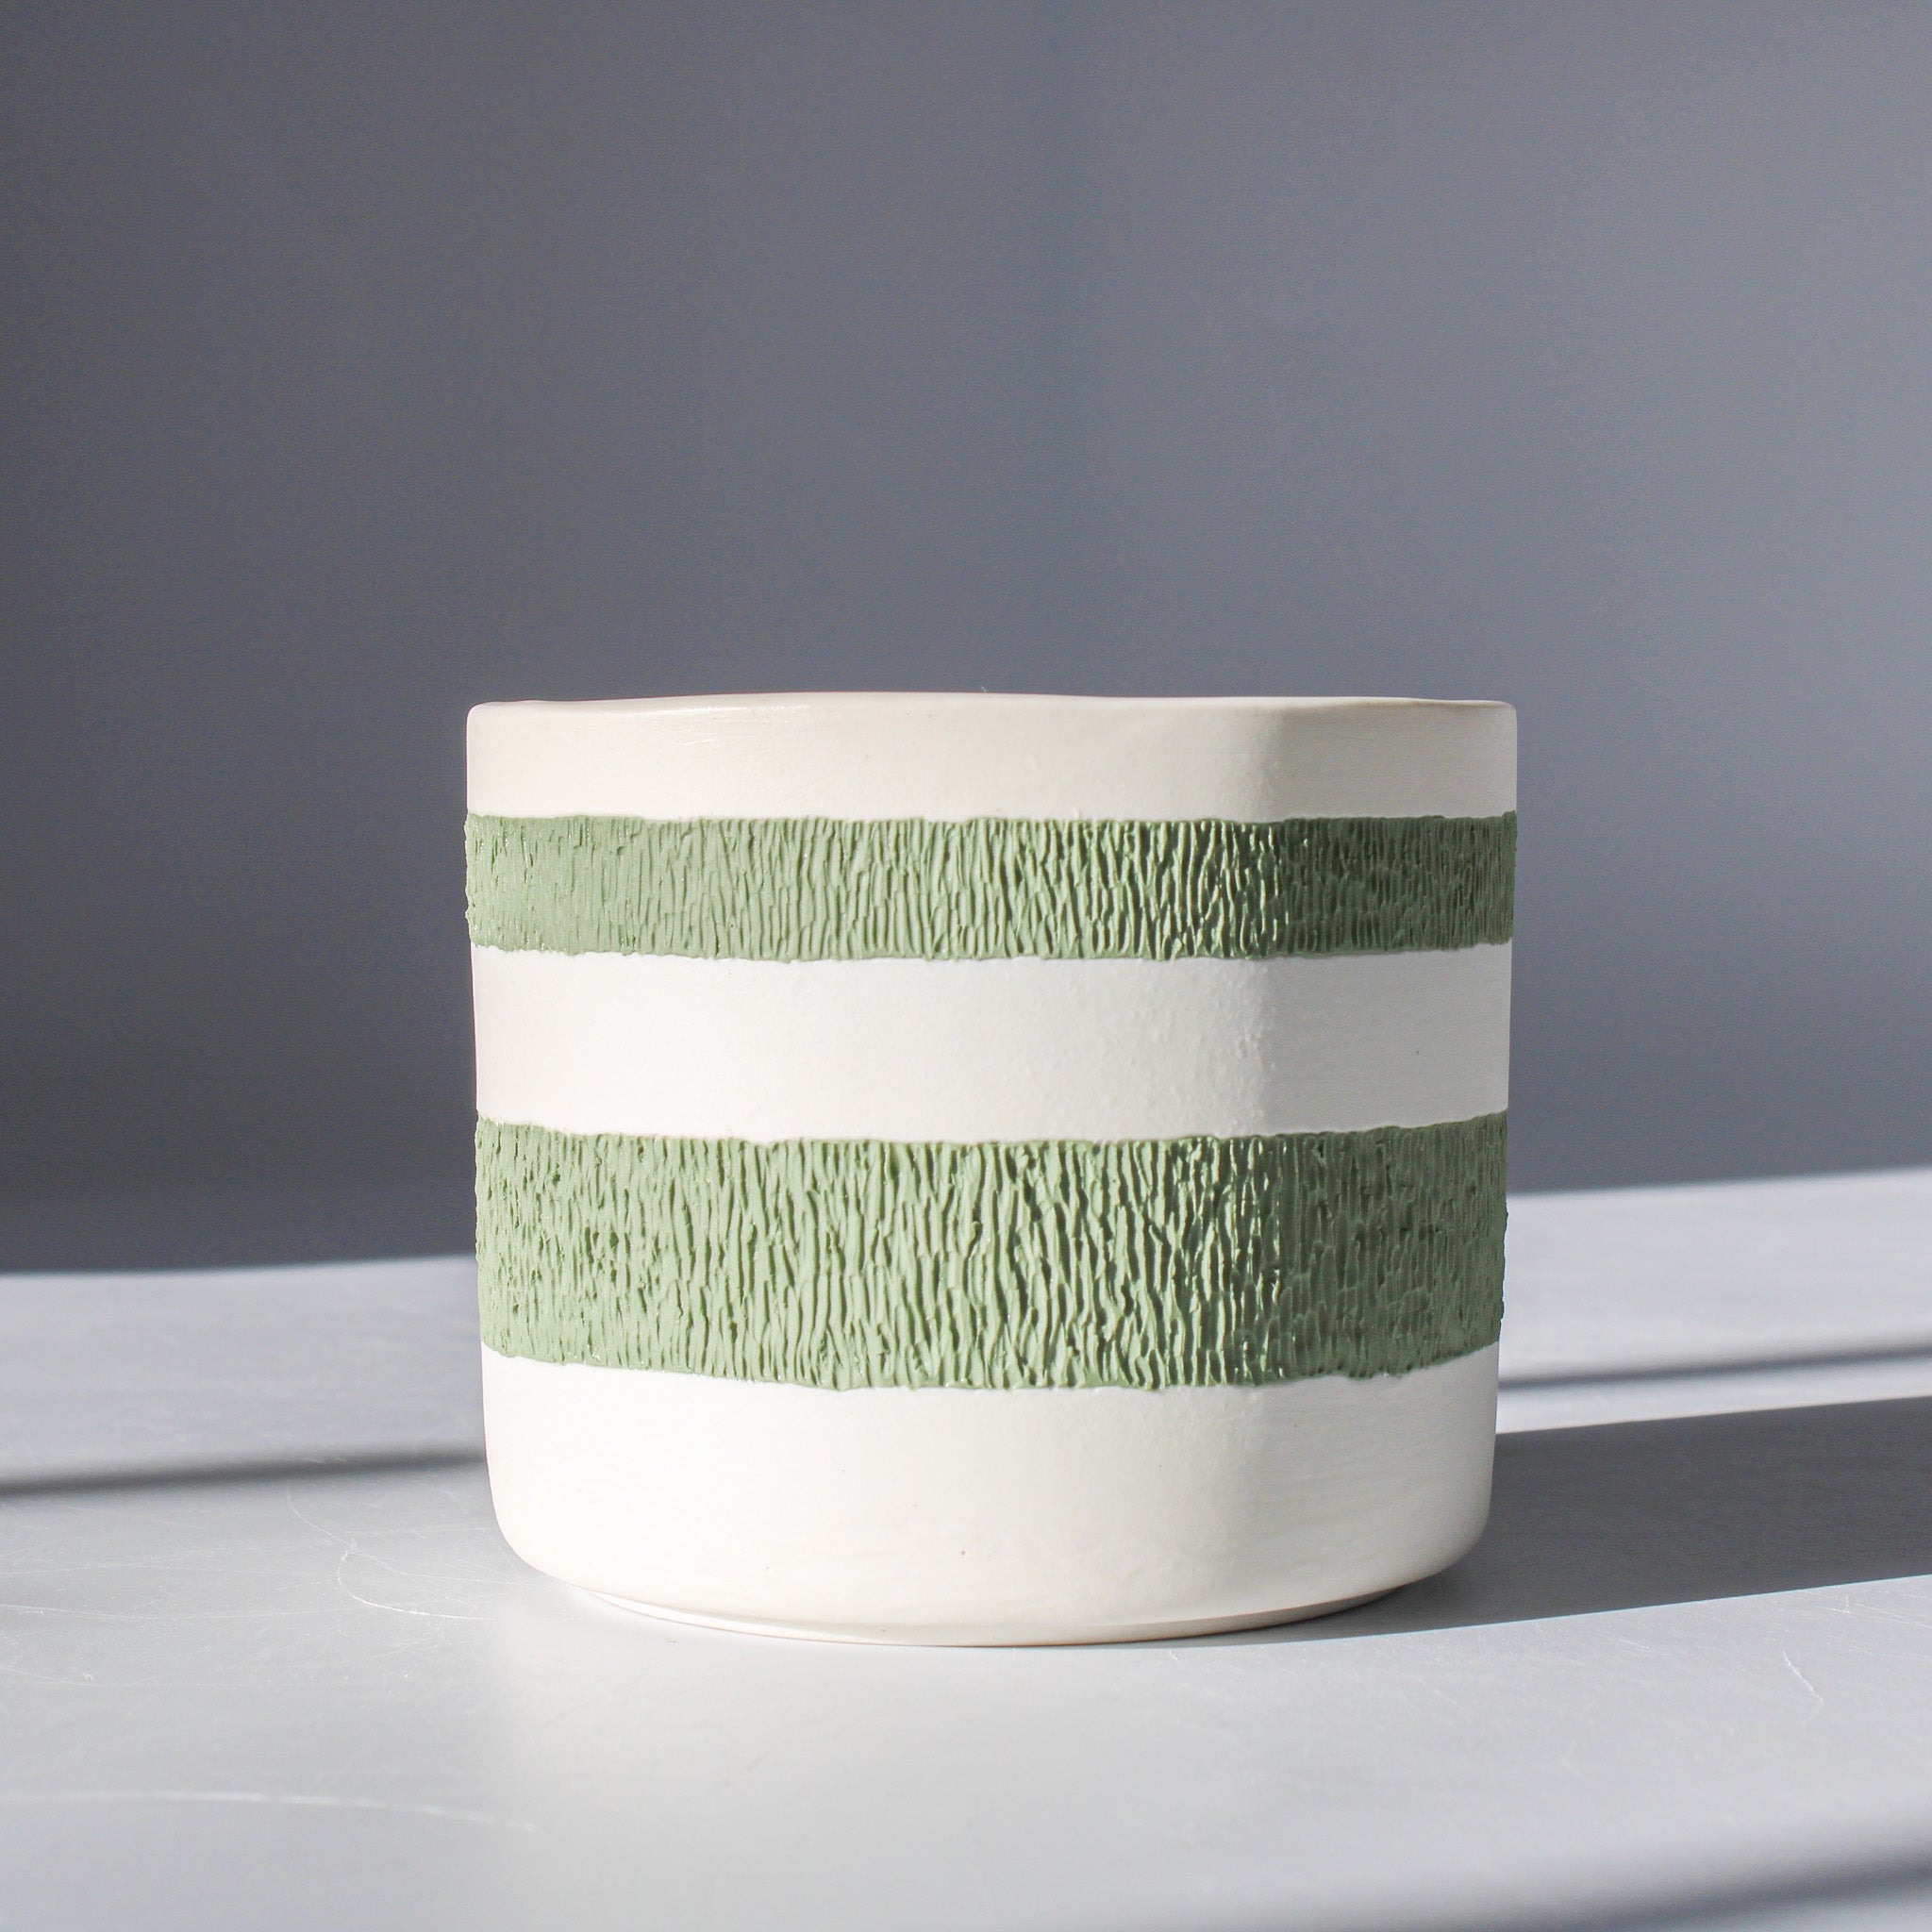 Green and White Striped Planter